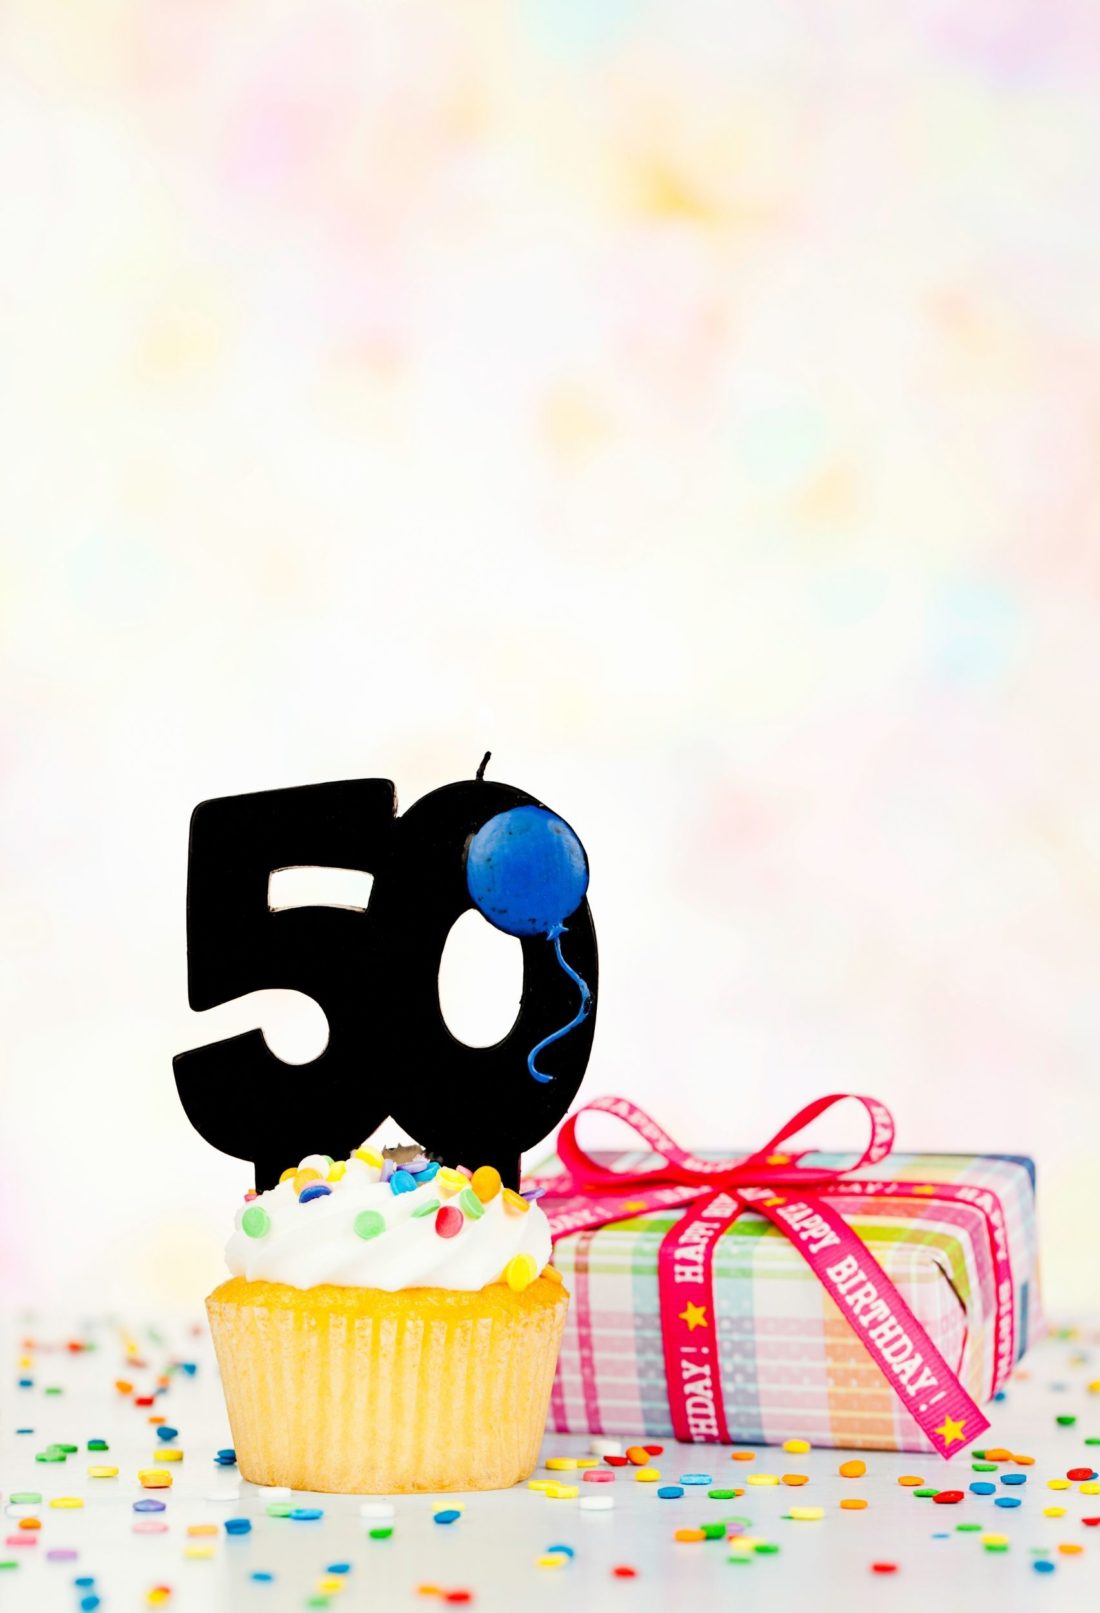 Buying Your Wife the Perfect 50th Birthday Gift - Rita Reviews